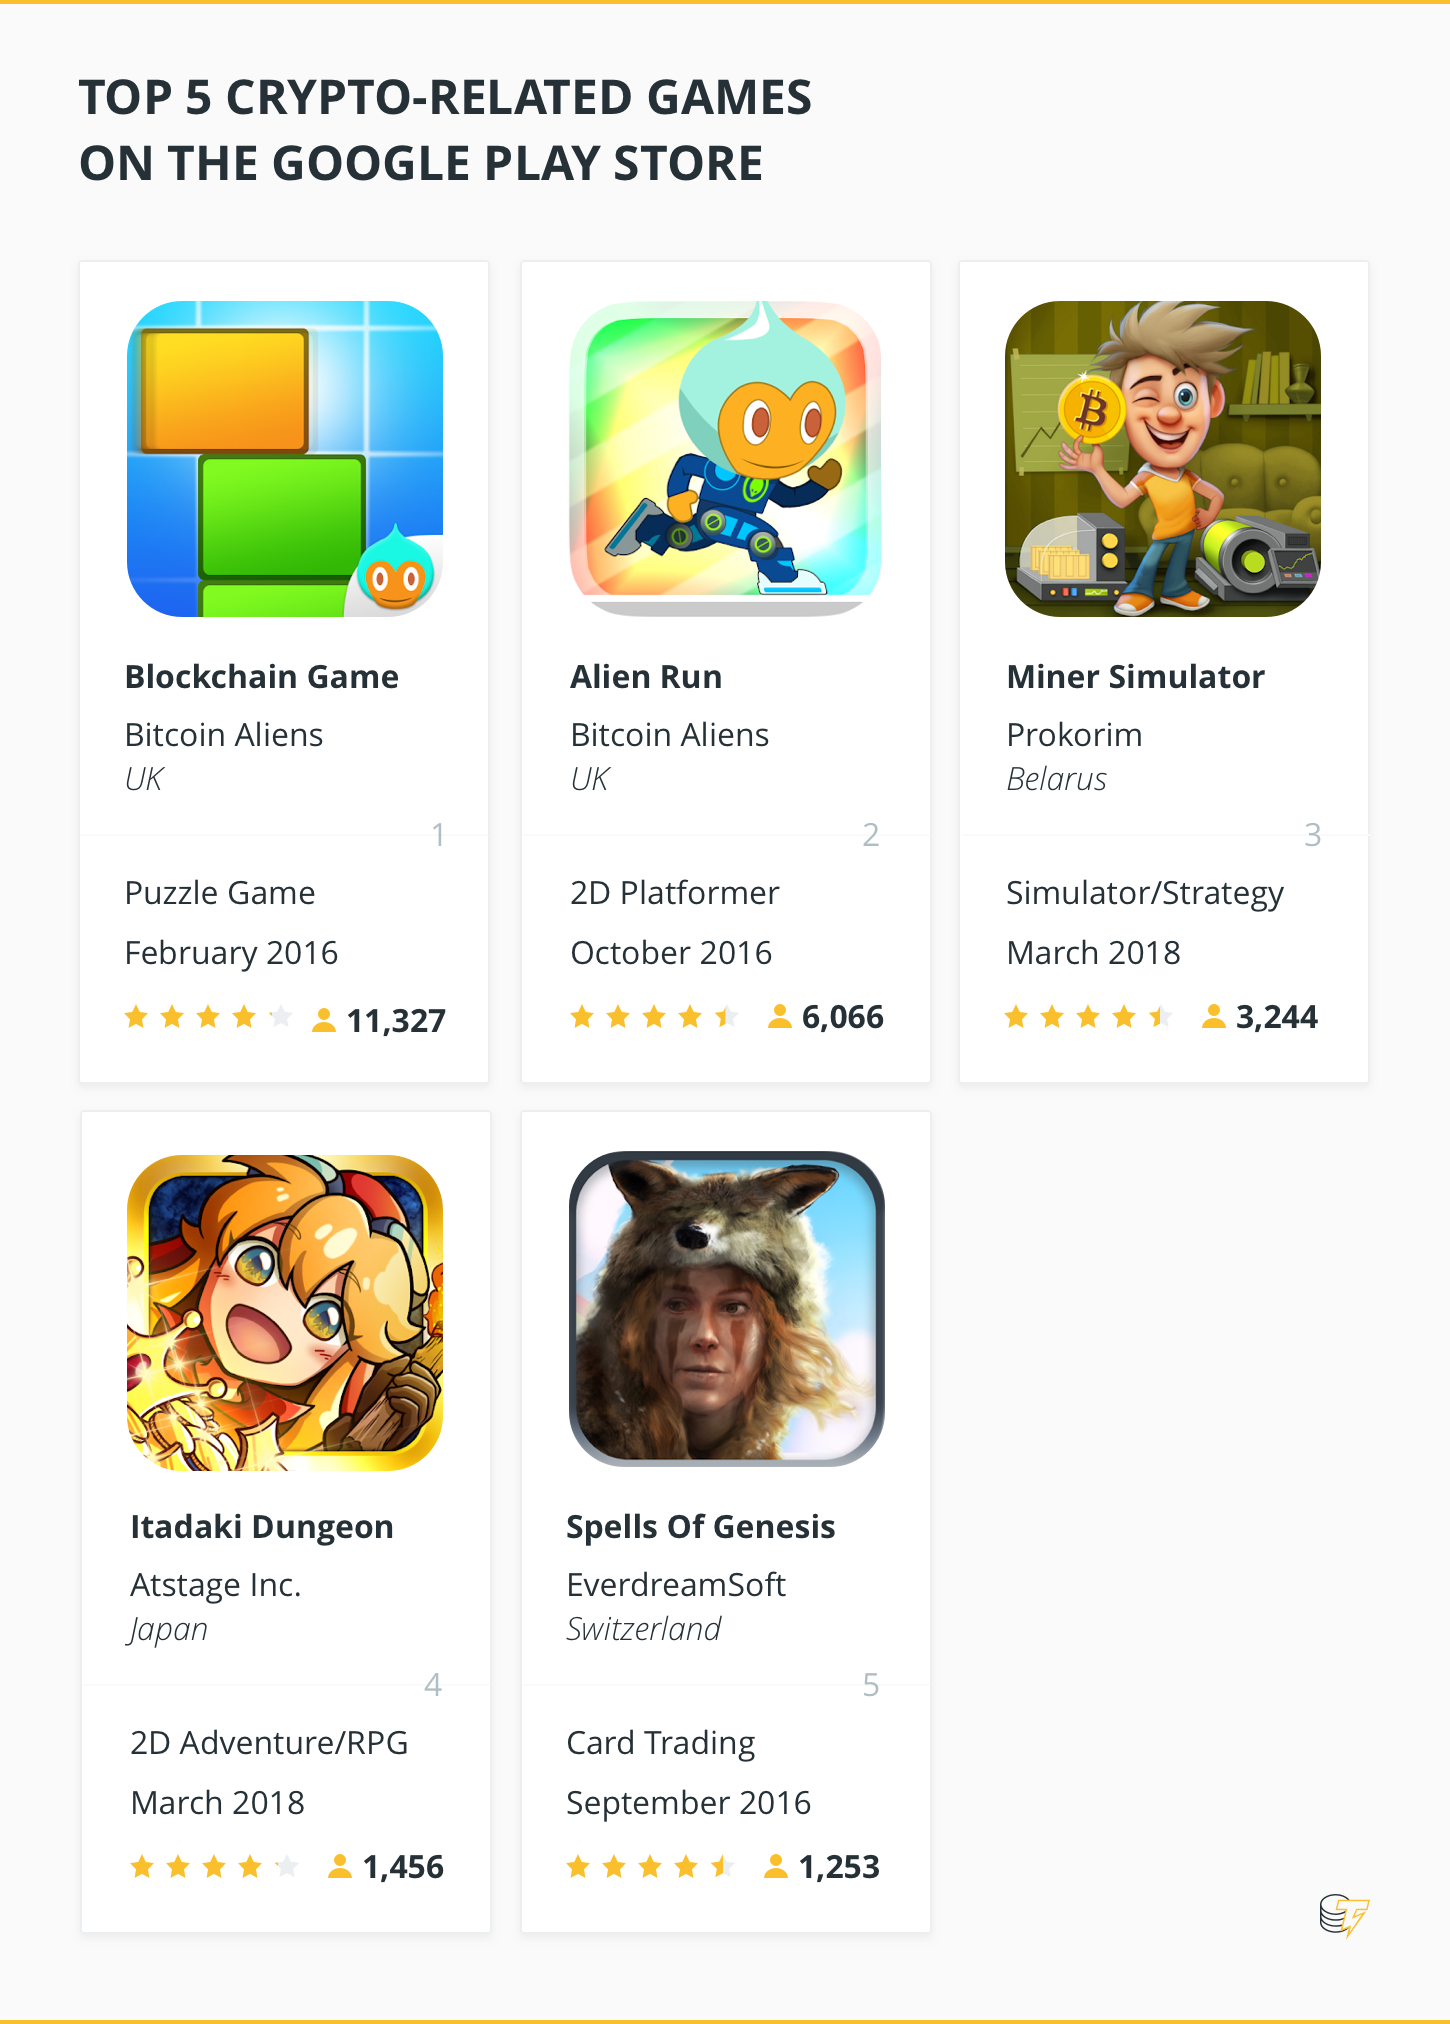 TOP 5 CRYPTO-RELATED GAMES ON THE GOOGLE PLAY STORE